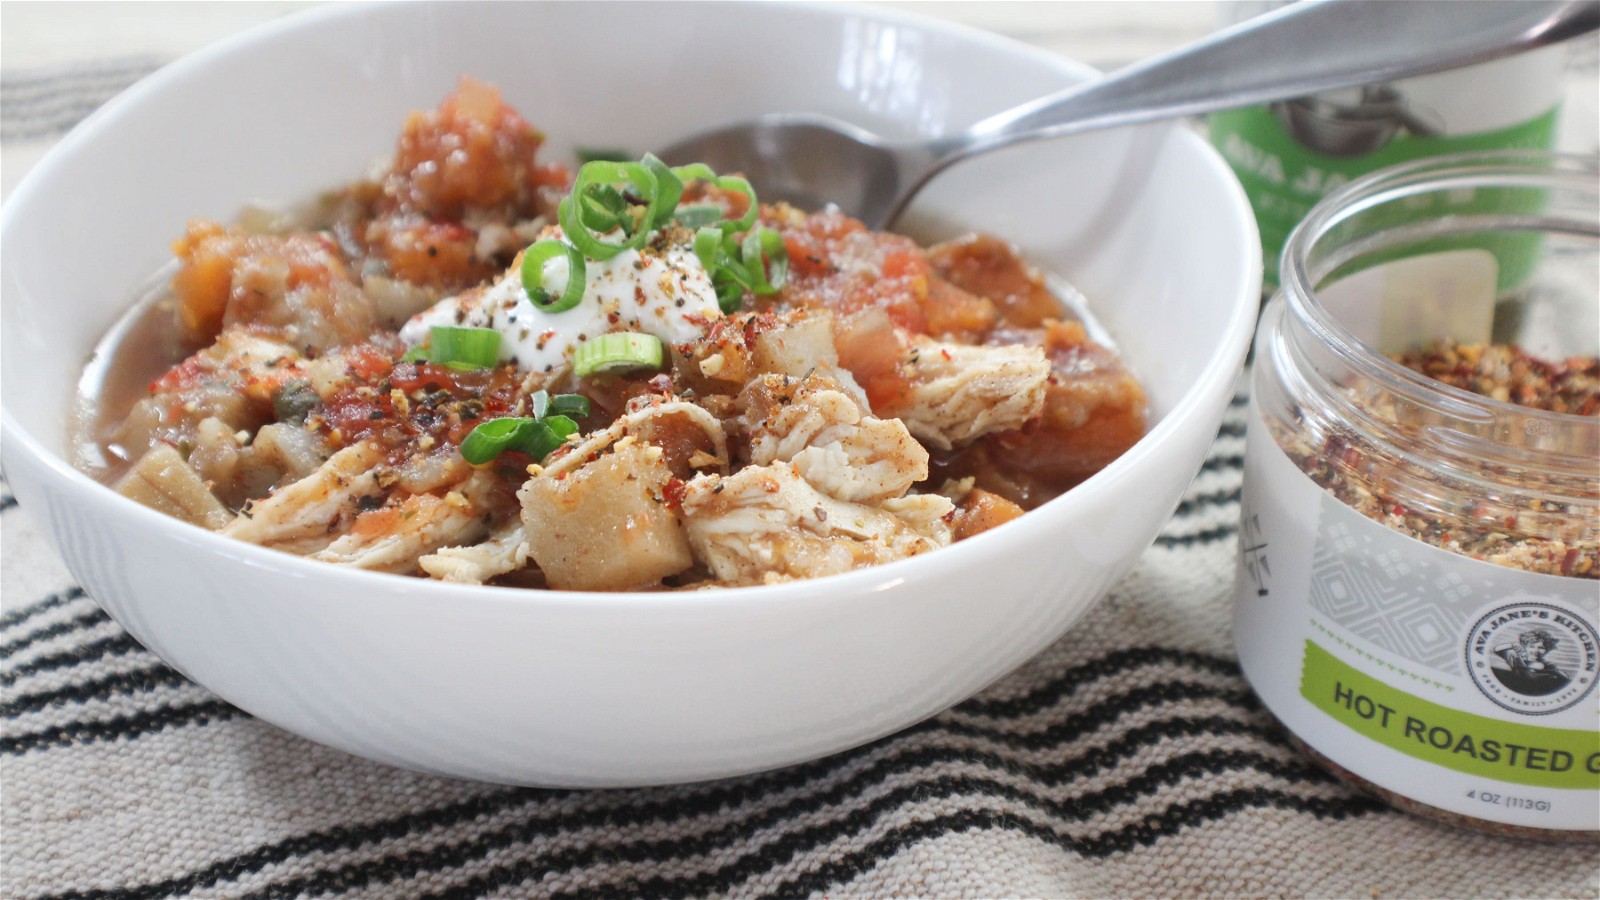 Image of HOT ROASTED GARLIC CHICKEN AND WHITE BEAN STEW